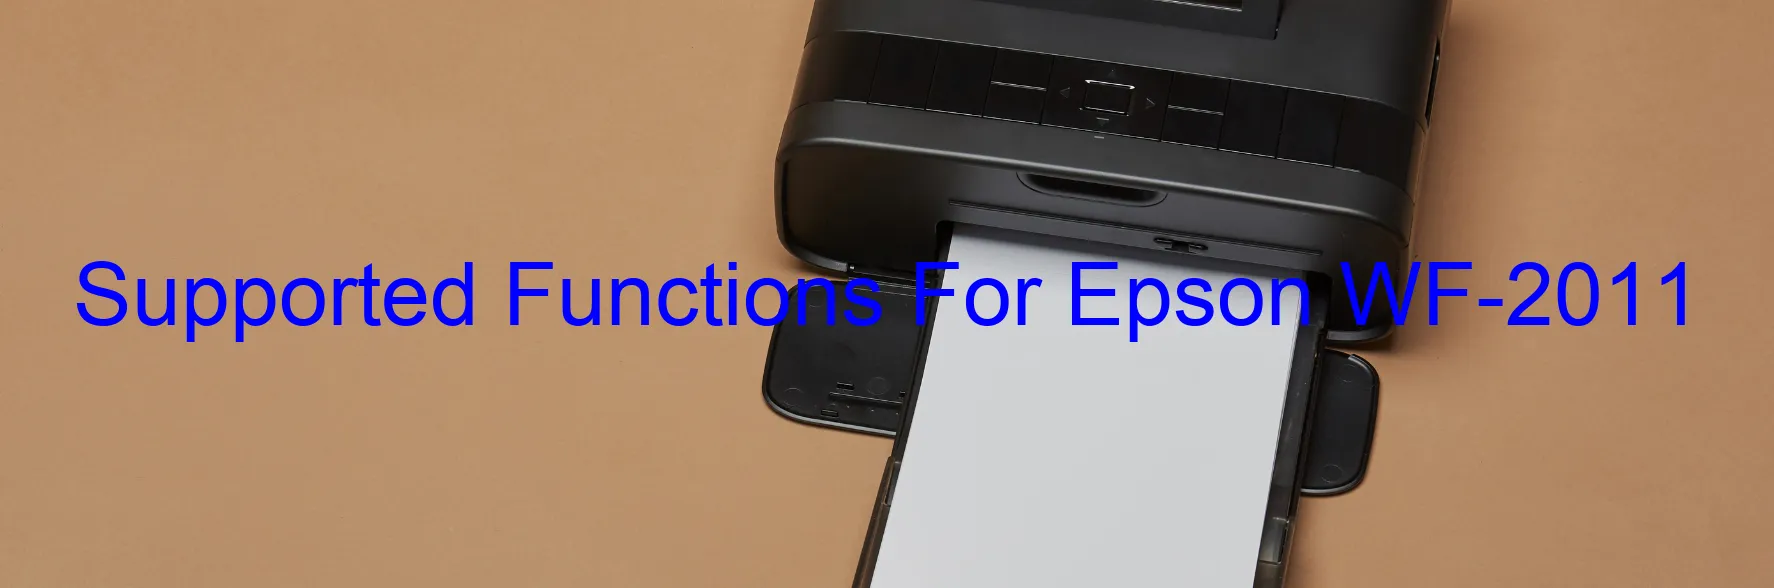 supported-functions-for-epson-wf-2011.webp